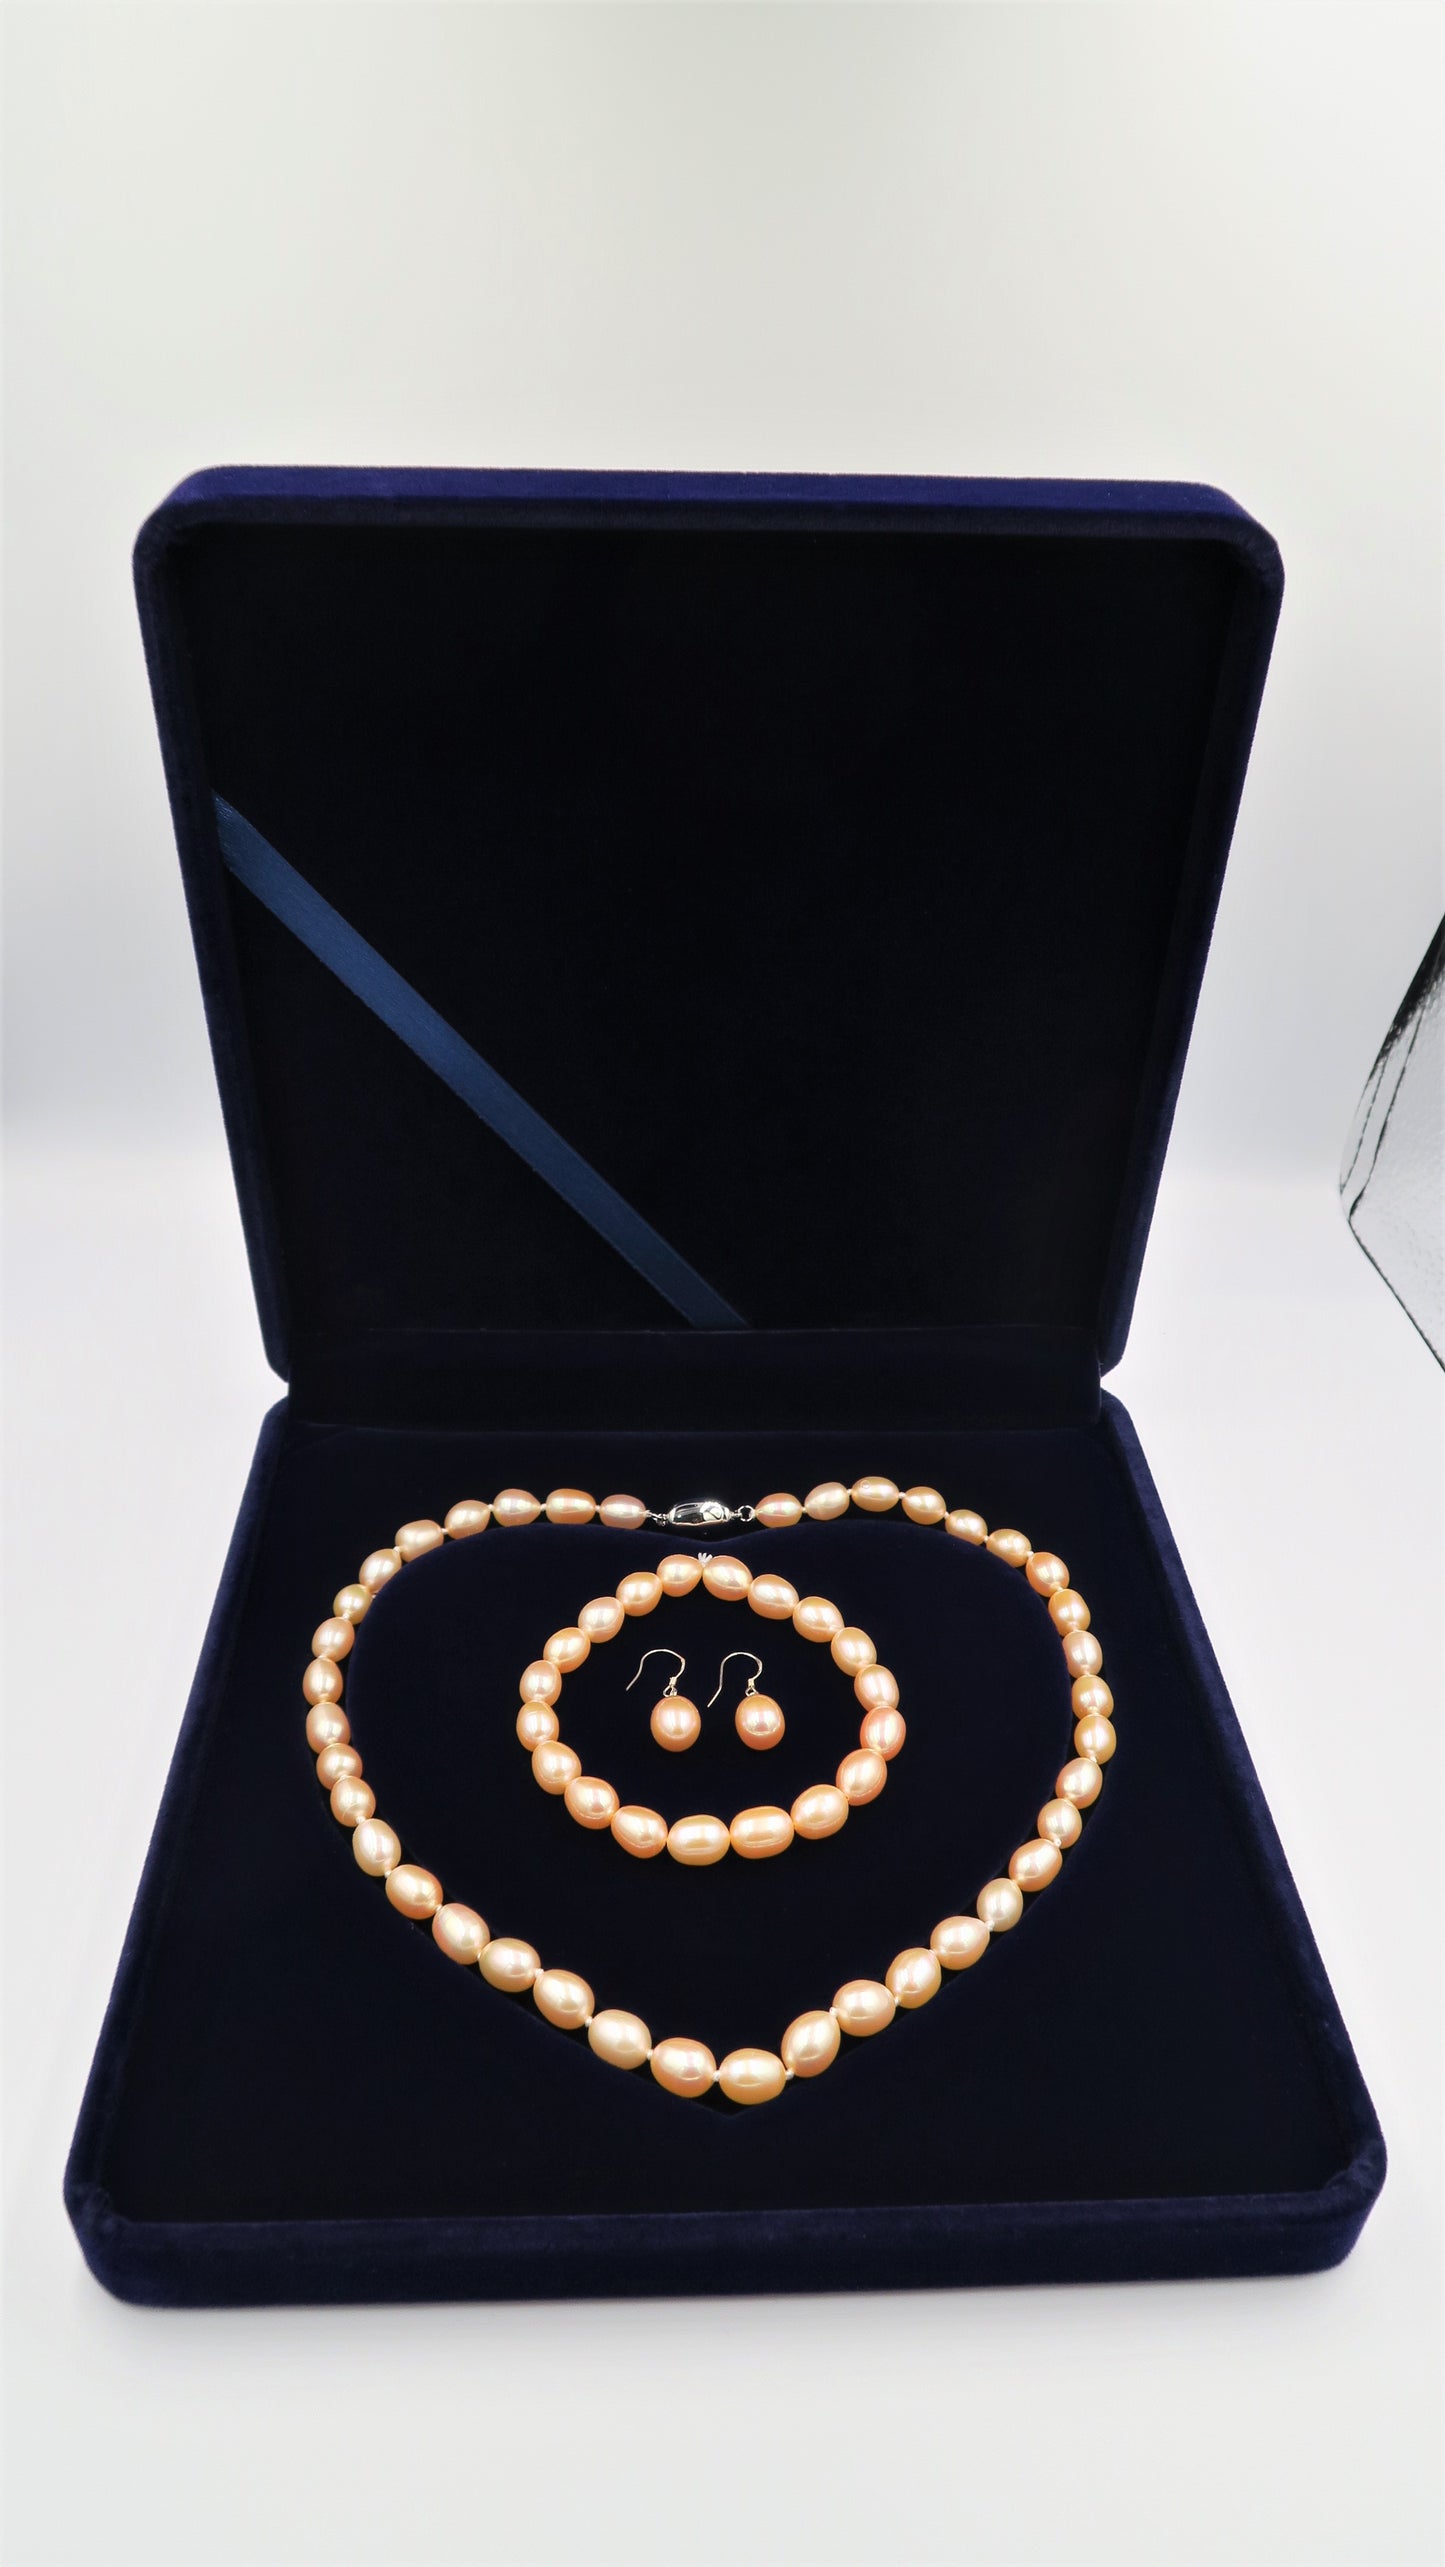 PC - Real Pearl Full Set Peach Pink Pearls Necklace Bracelet Earring Drop Rice Shape Celeste 925 Sterling Silver gift